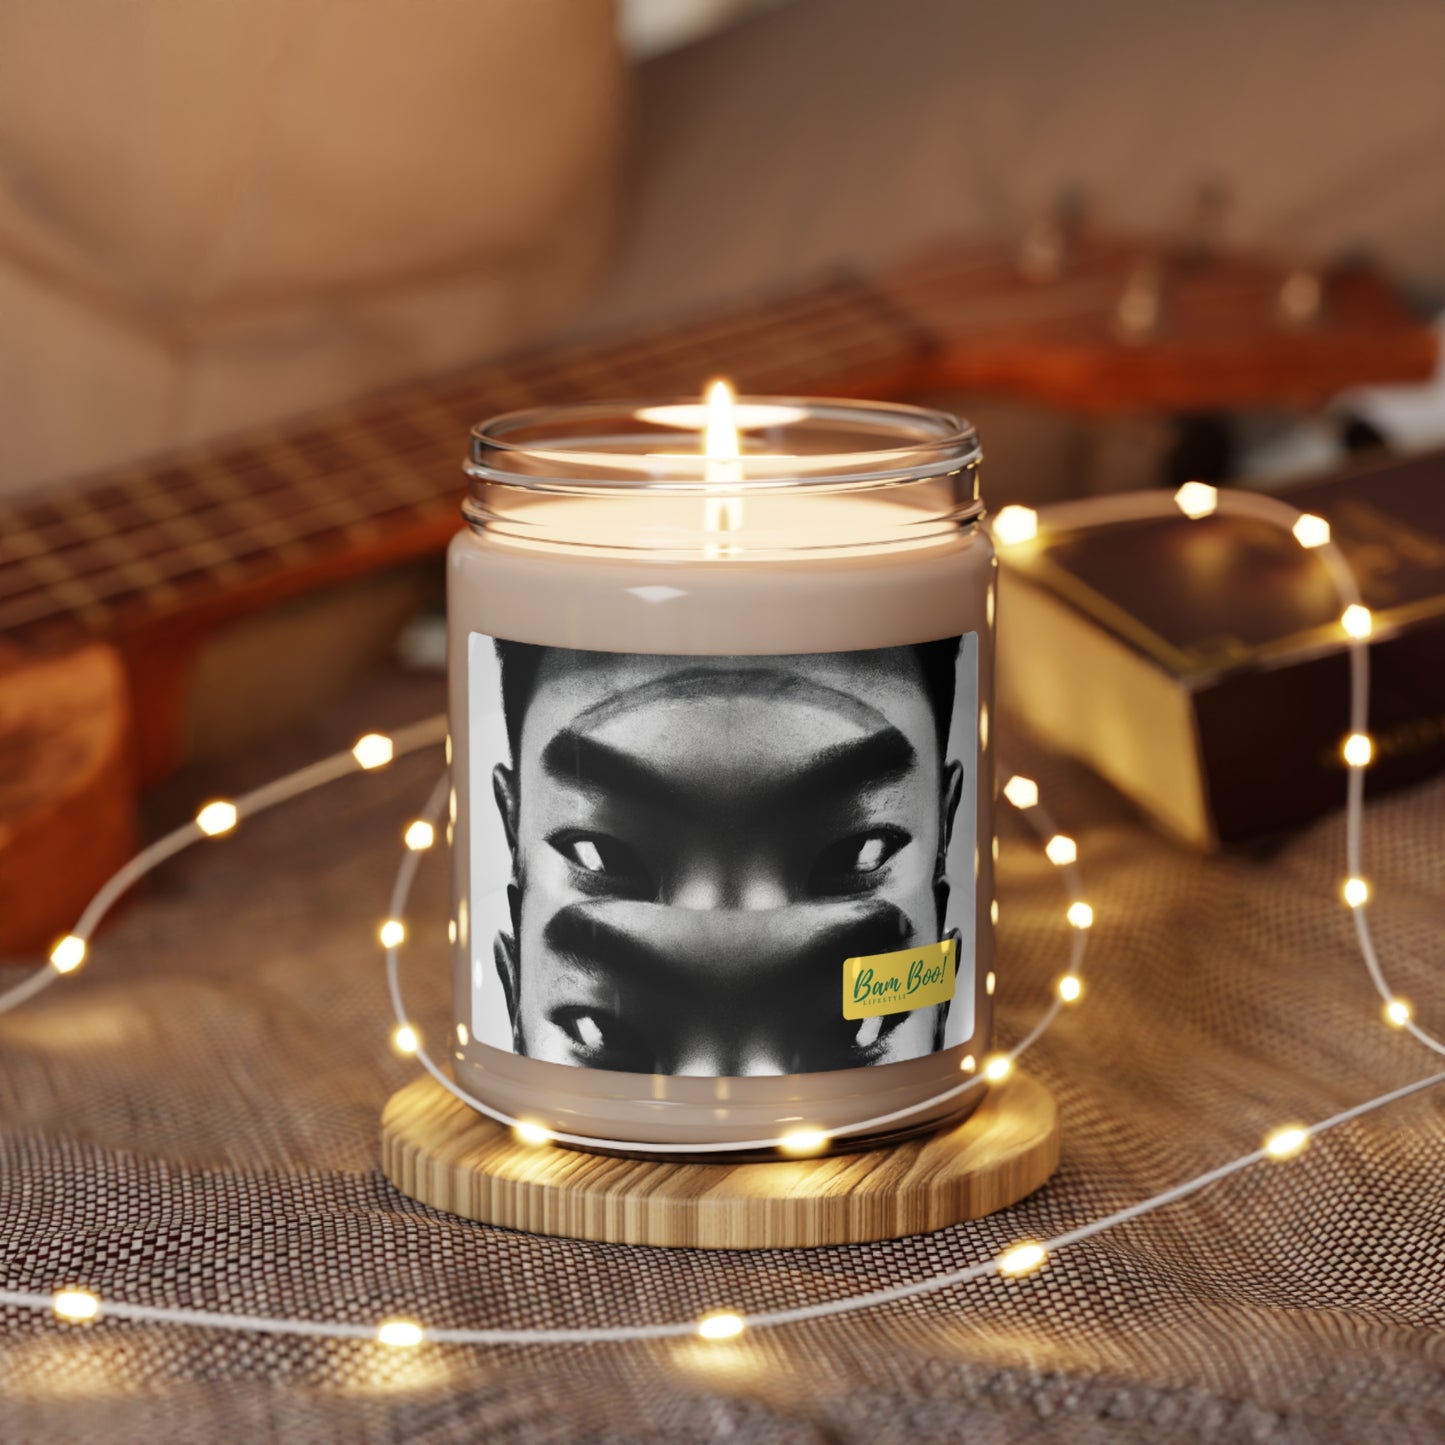 "Asymetric Self-Portrait" - Bam Boo! Lifestyle Eco-friendly Soy Candle